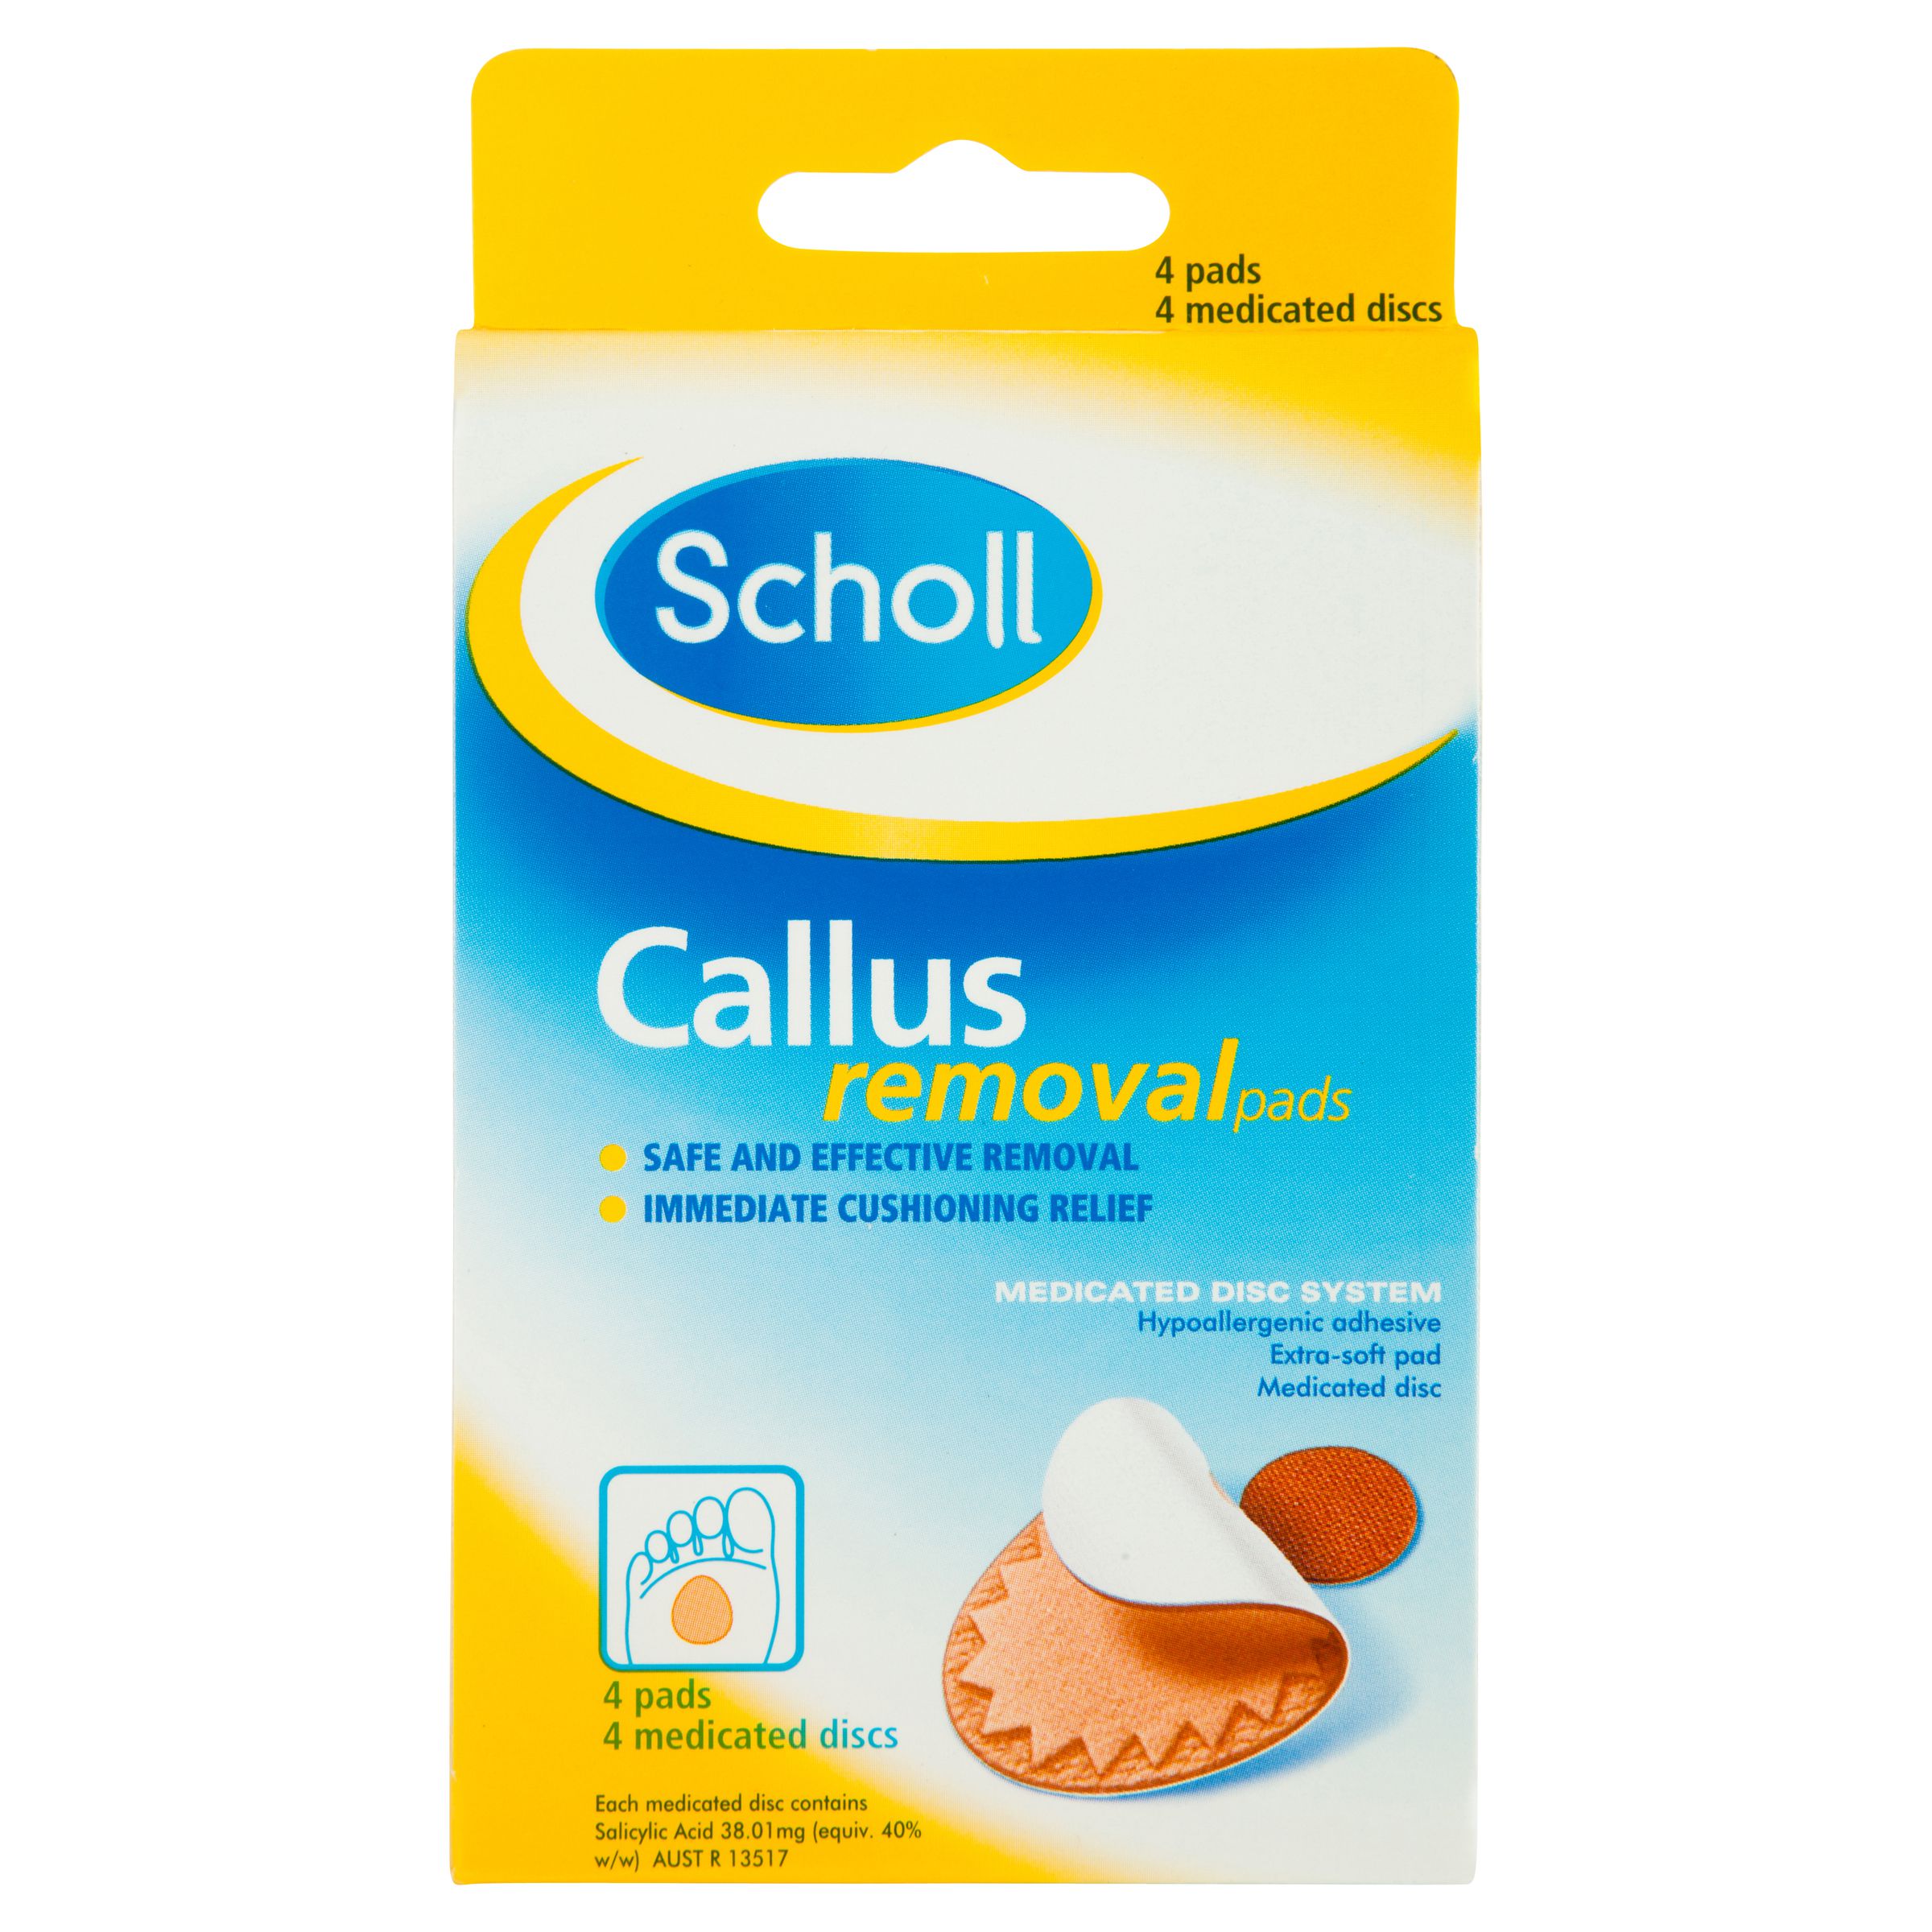 Scholl Callus Removal Pads